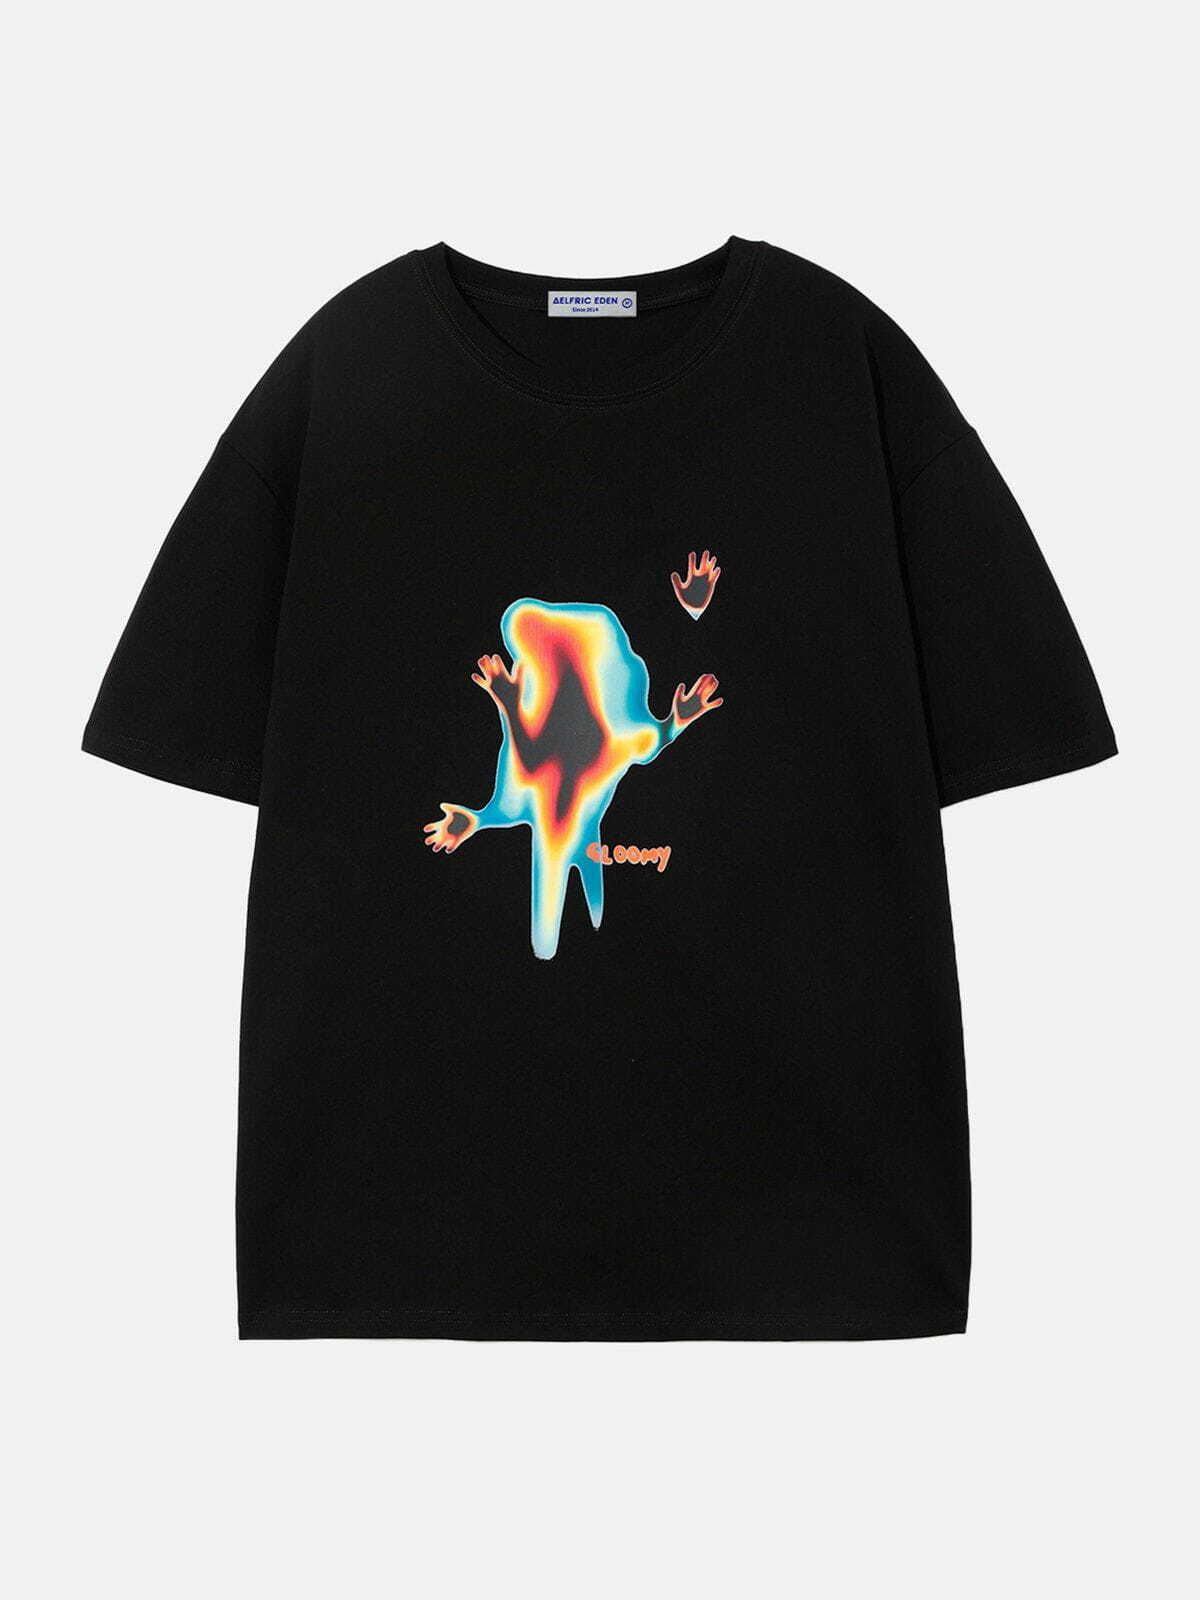 dynamic thermal imaging tee urban & youthful appeal 2346